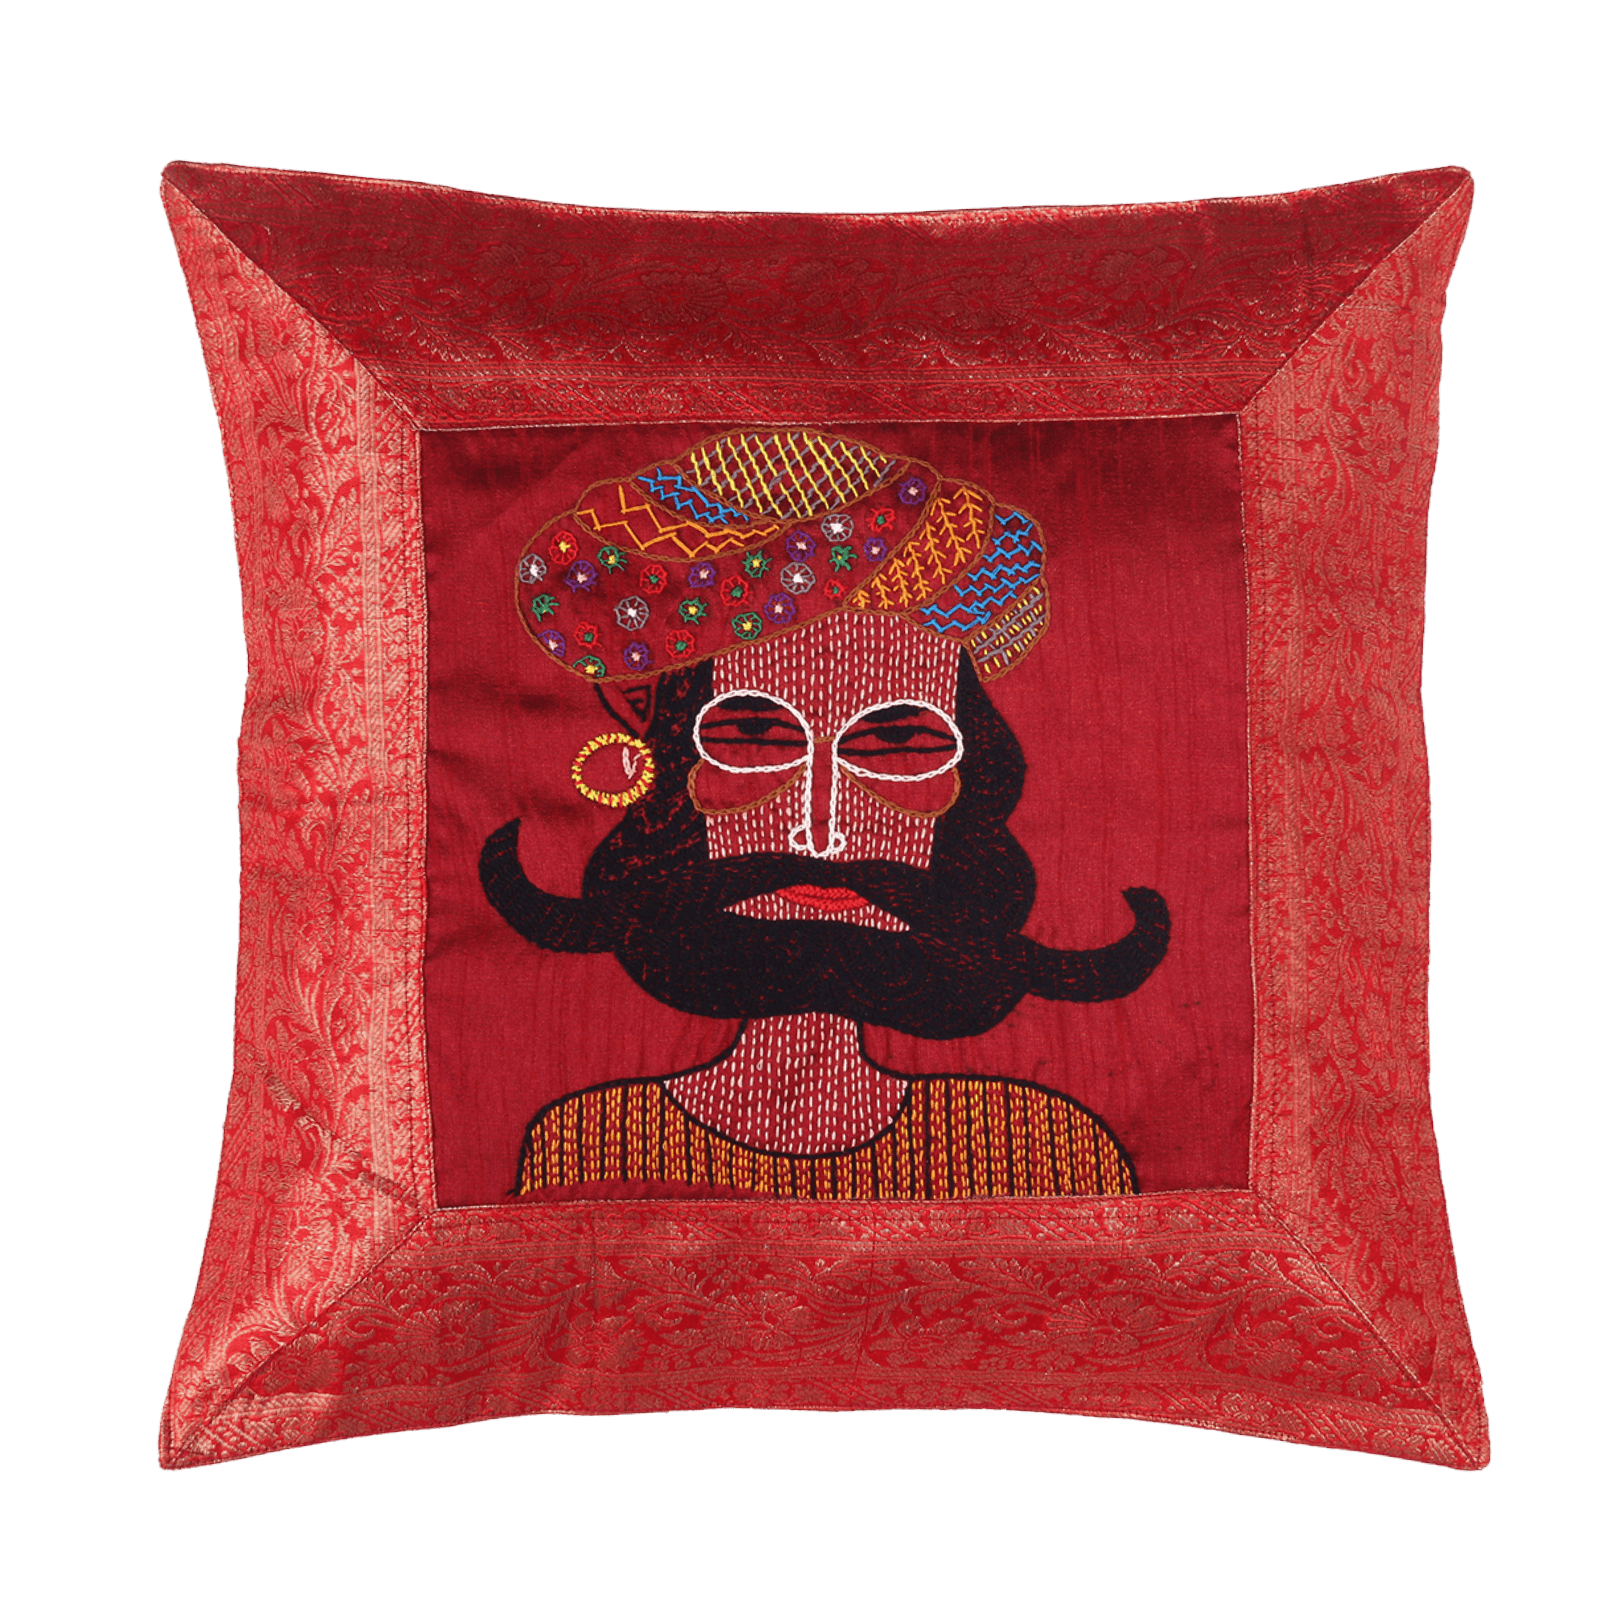 Rajasthan Cushion Cover With Embroidery - Present Company